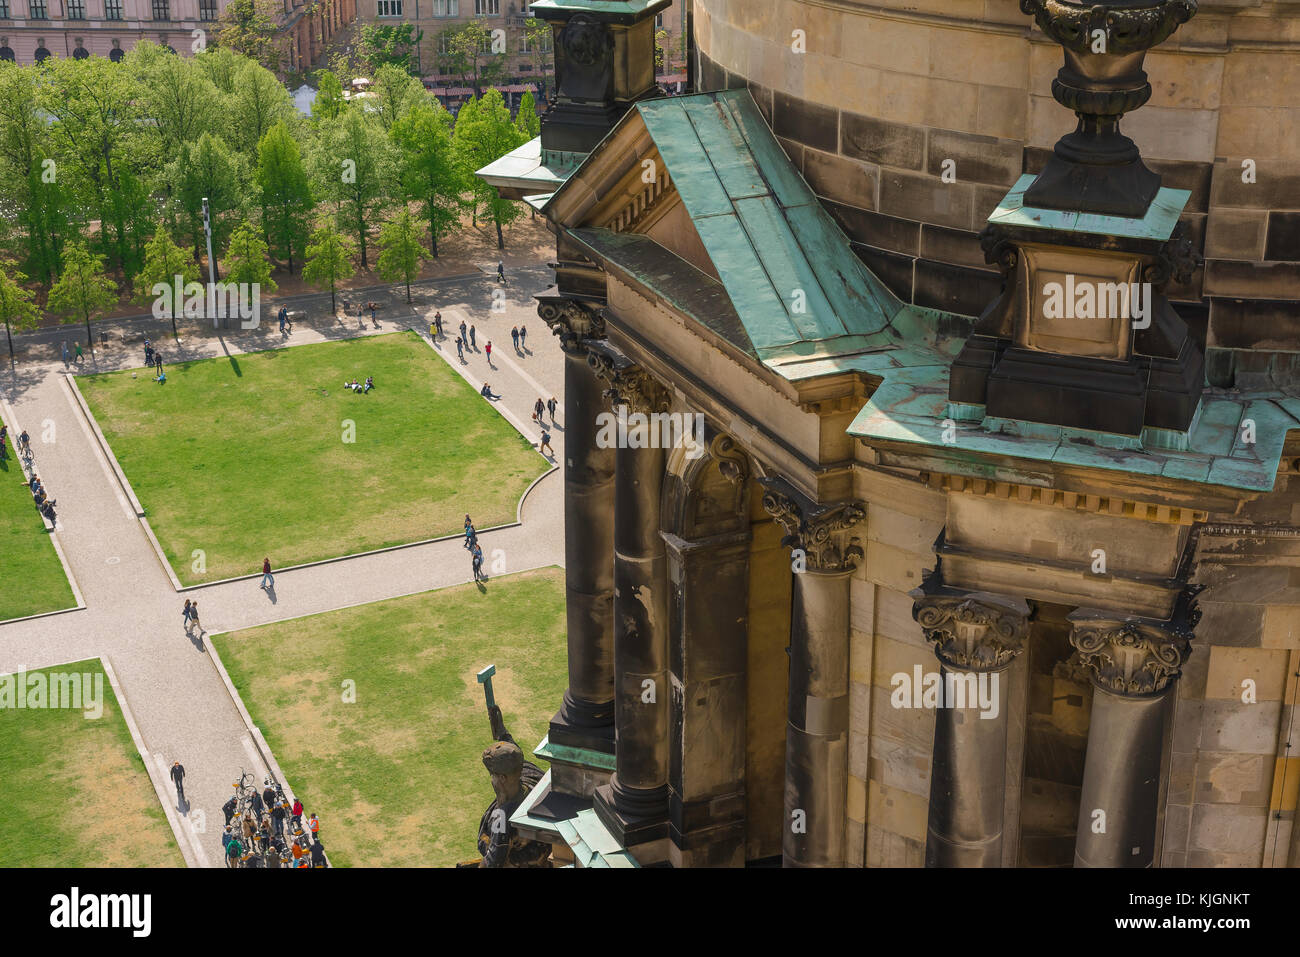 Berlin cathedral, view below the Berliner Dom's north transept as people cycle or stroll through the Lustgarten park on a summer day, Berlin, Germany. Stock Photo